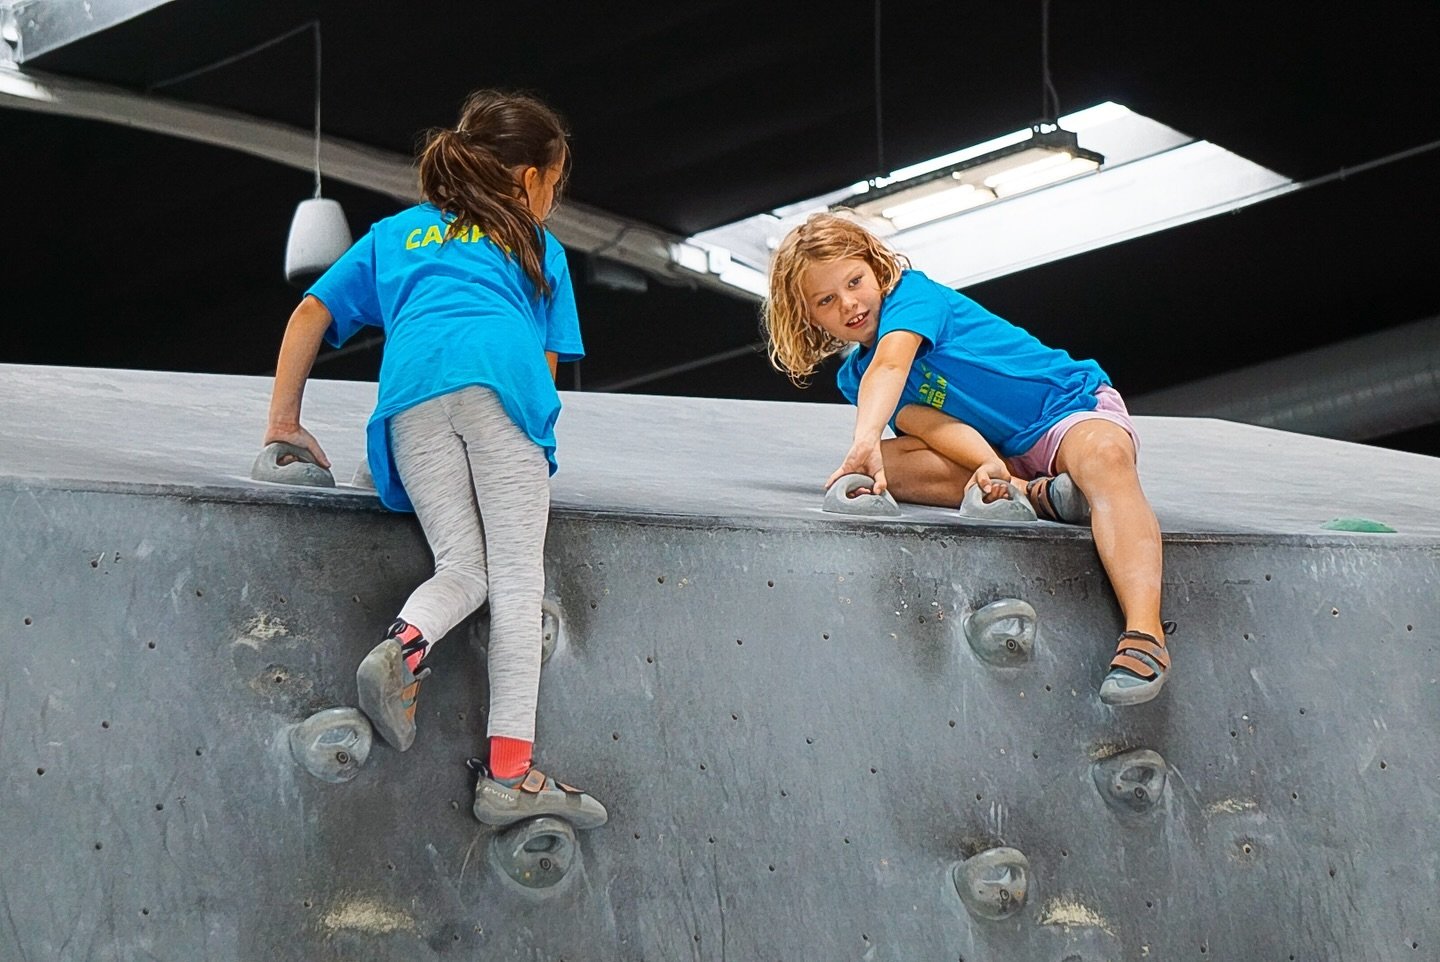 Are you searching for fun summer activities for your kids? 

Consider signing them up for VITAL's Summer Camp at VITAL Oceanside. They'll enjoy a great mix of activities like climbing, aerial silks, and more. This camp is tailored for children aged 1